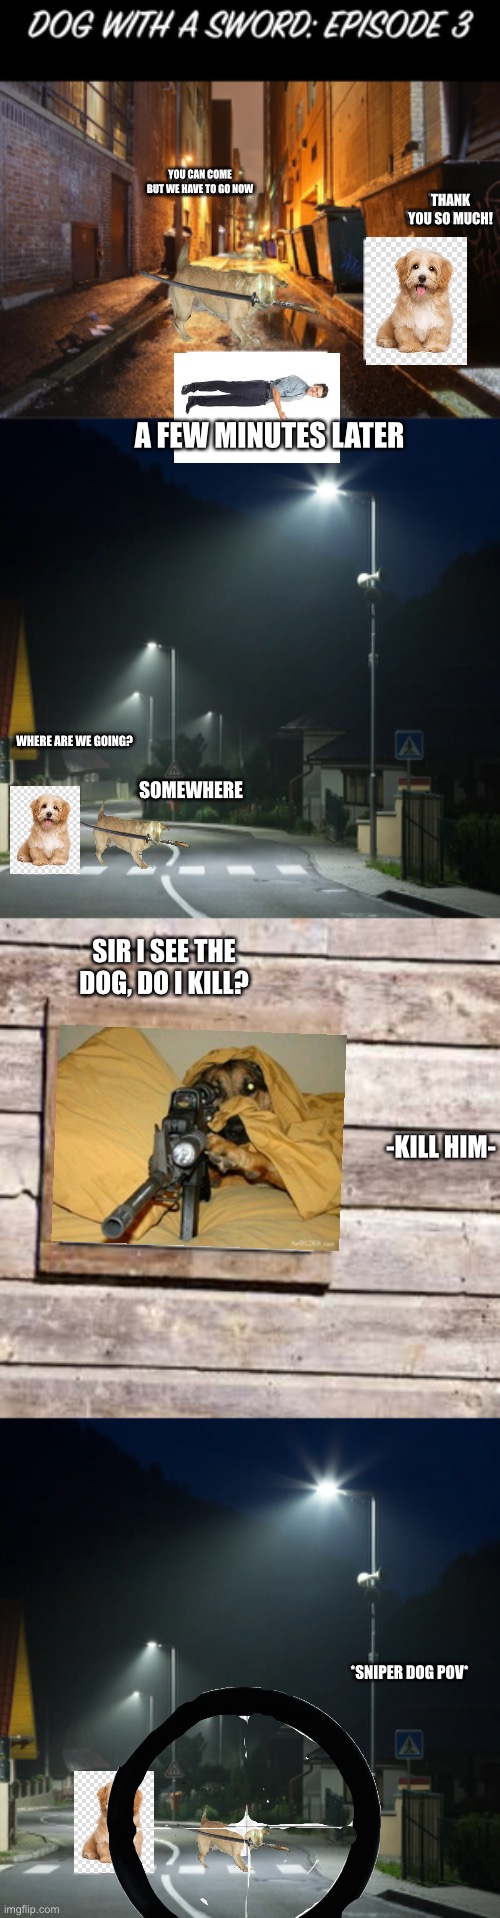 Finally episode 3 is done | YOU CAN COME BUT WE HAVE TO GO NOW; THANK YOU SO MUCH! A FEW MINUTES LATER; WHERE ARE WE GOING? SOMEWHERE; SIR I SEE THE DOG, DO I KILL? -KILL HIM-; *SNIPER DOG POV* | image tagged in dog with a sword | made w/ Imgflip meme maker